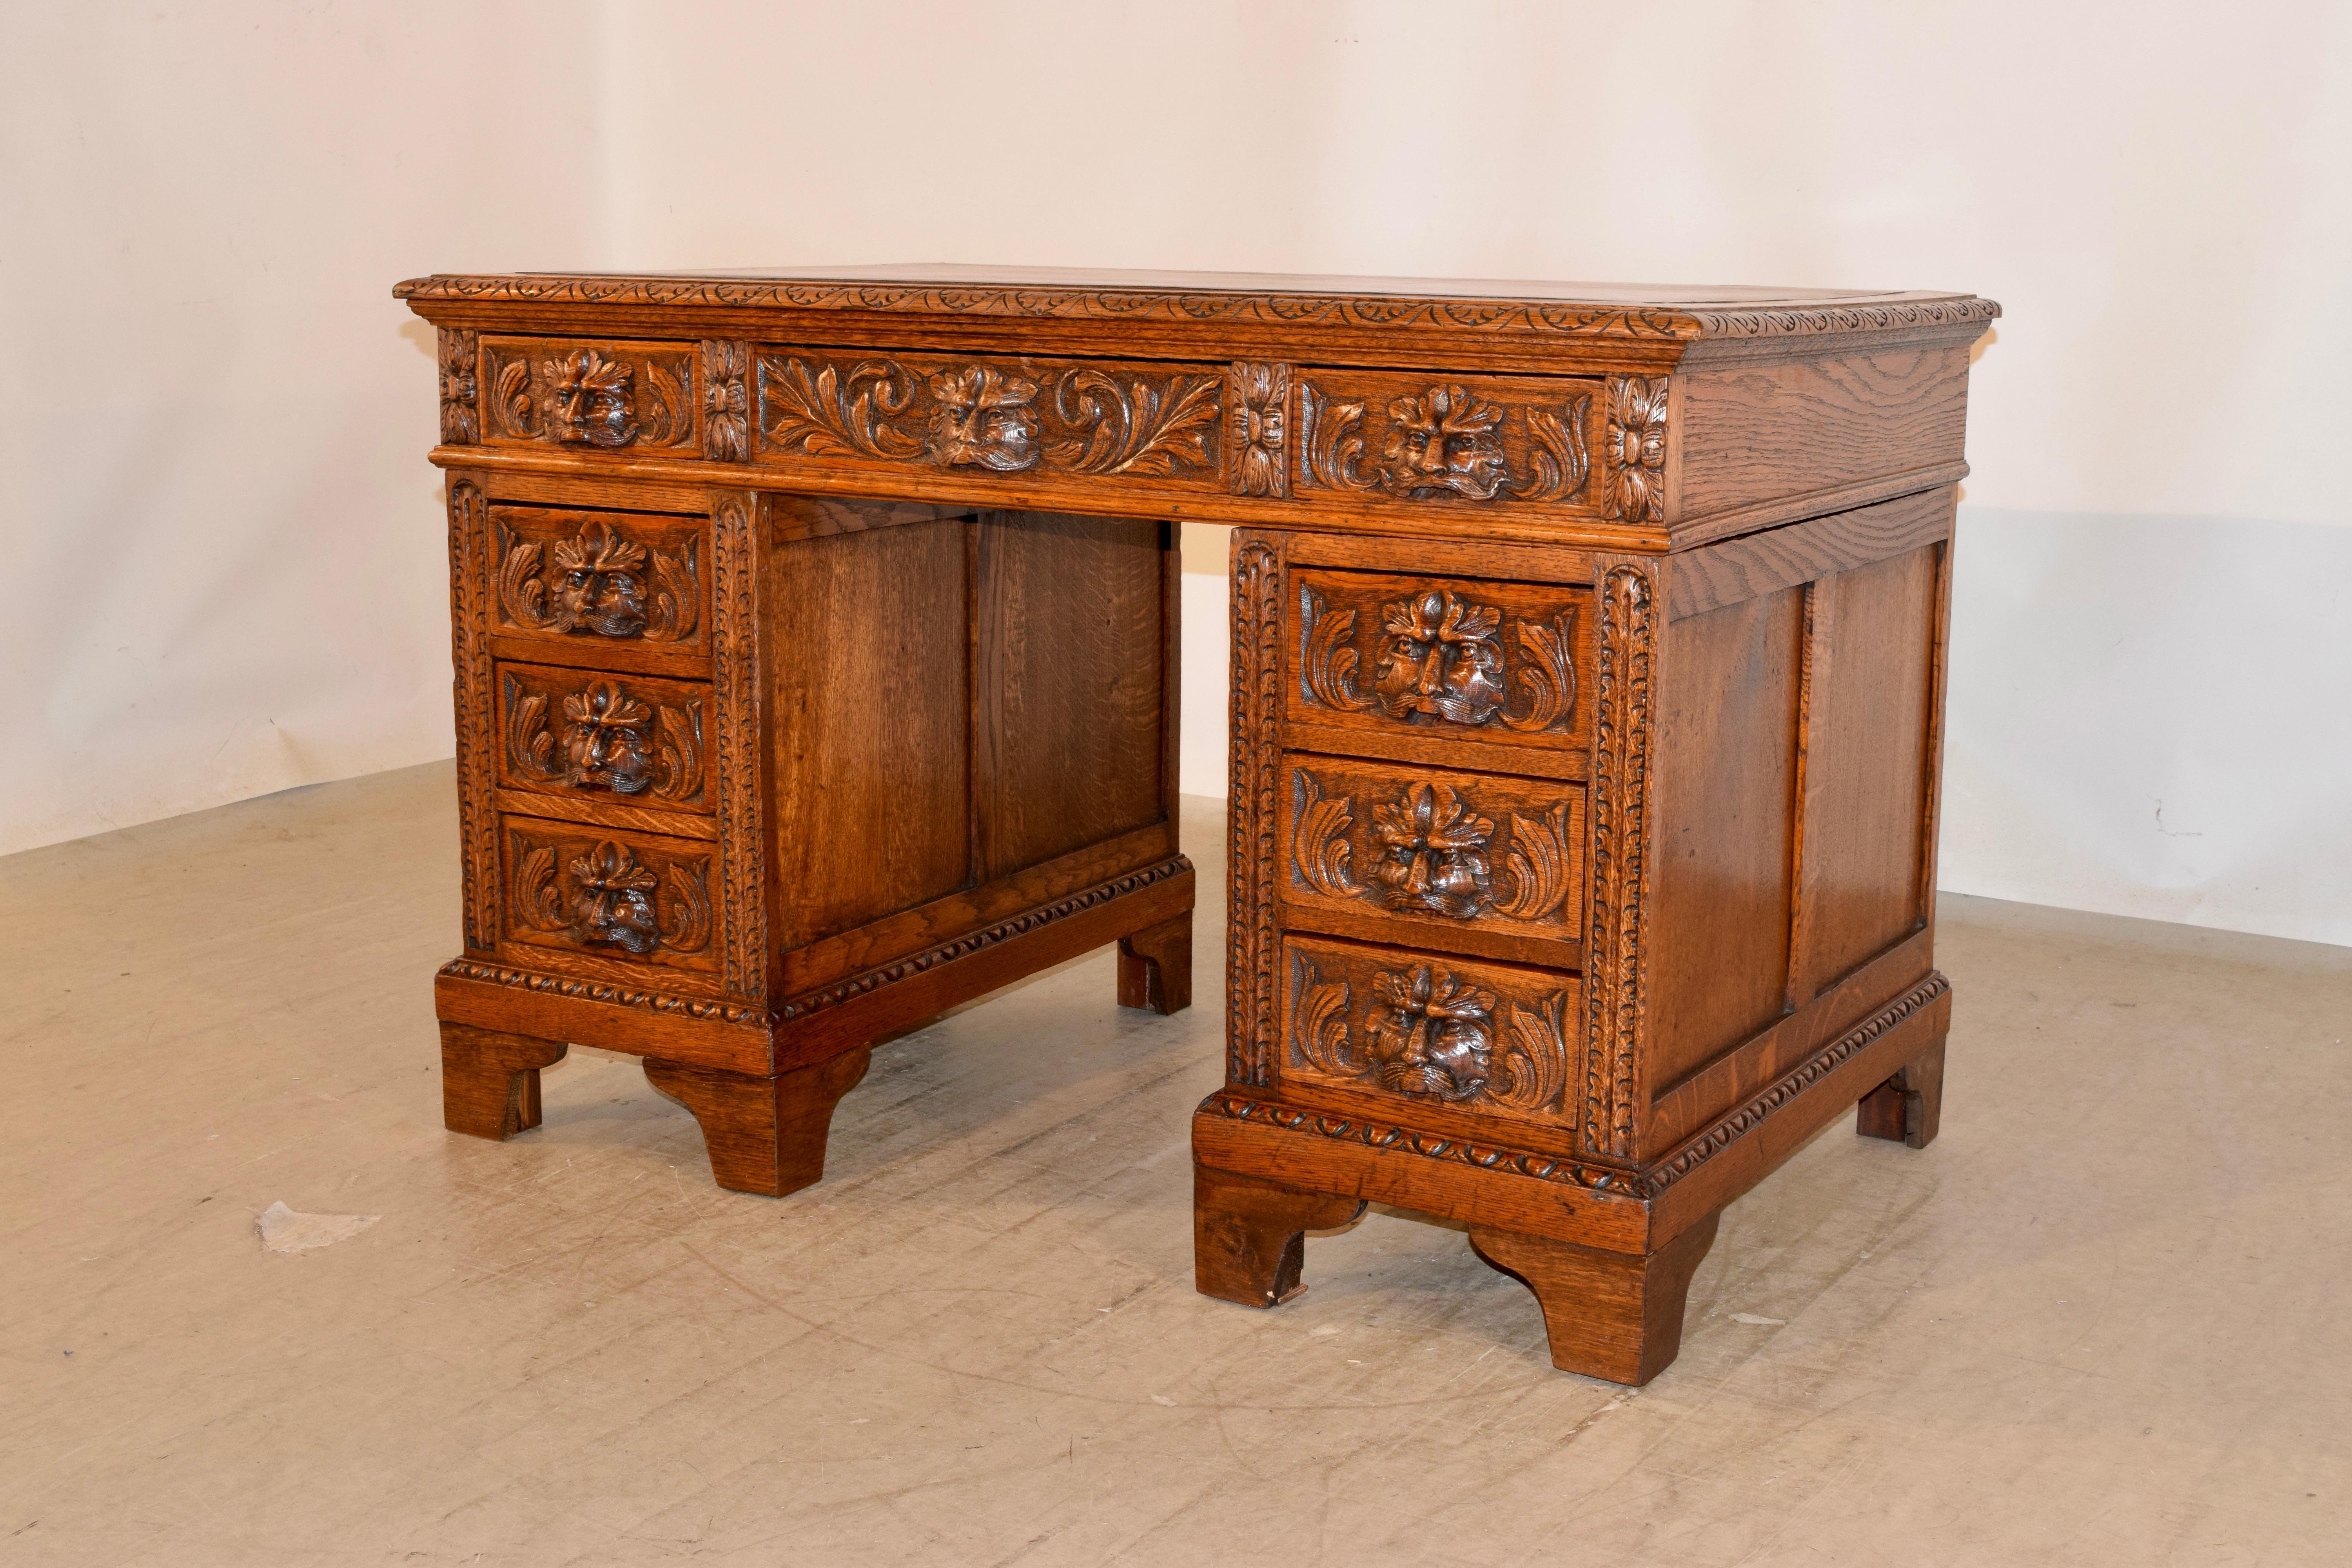 19th Century Carved Oak Pedestal Desk In Good Condition For Sale In High Point, NC